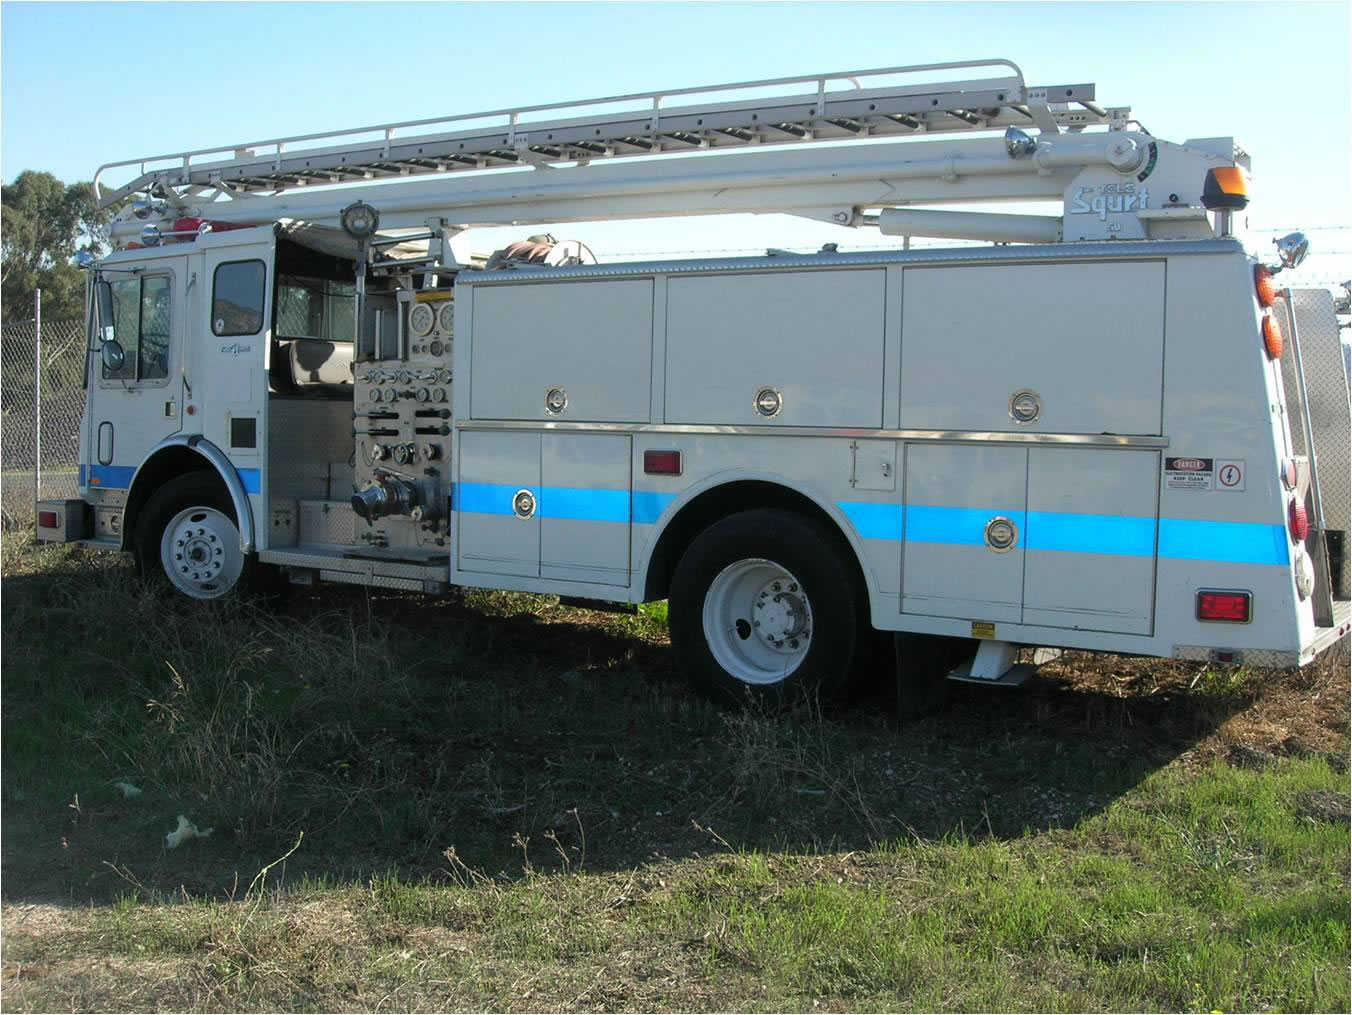 Donation of modern fire engine